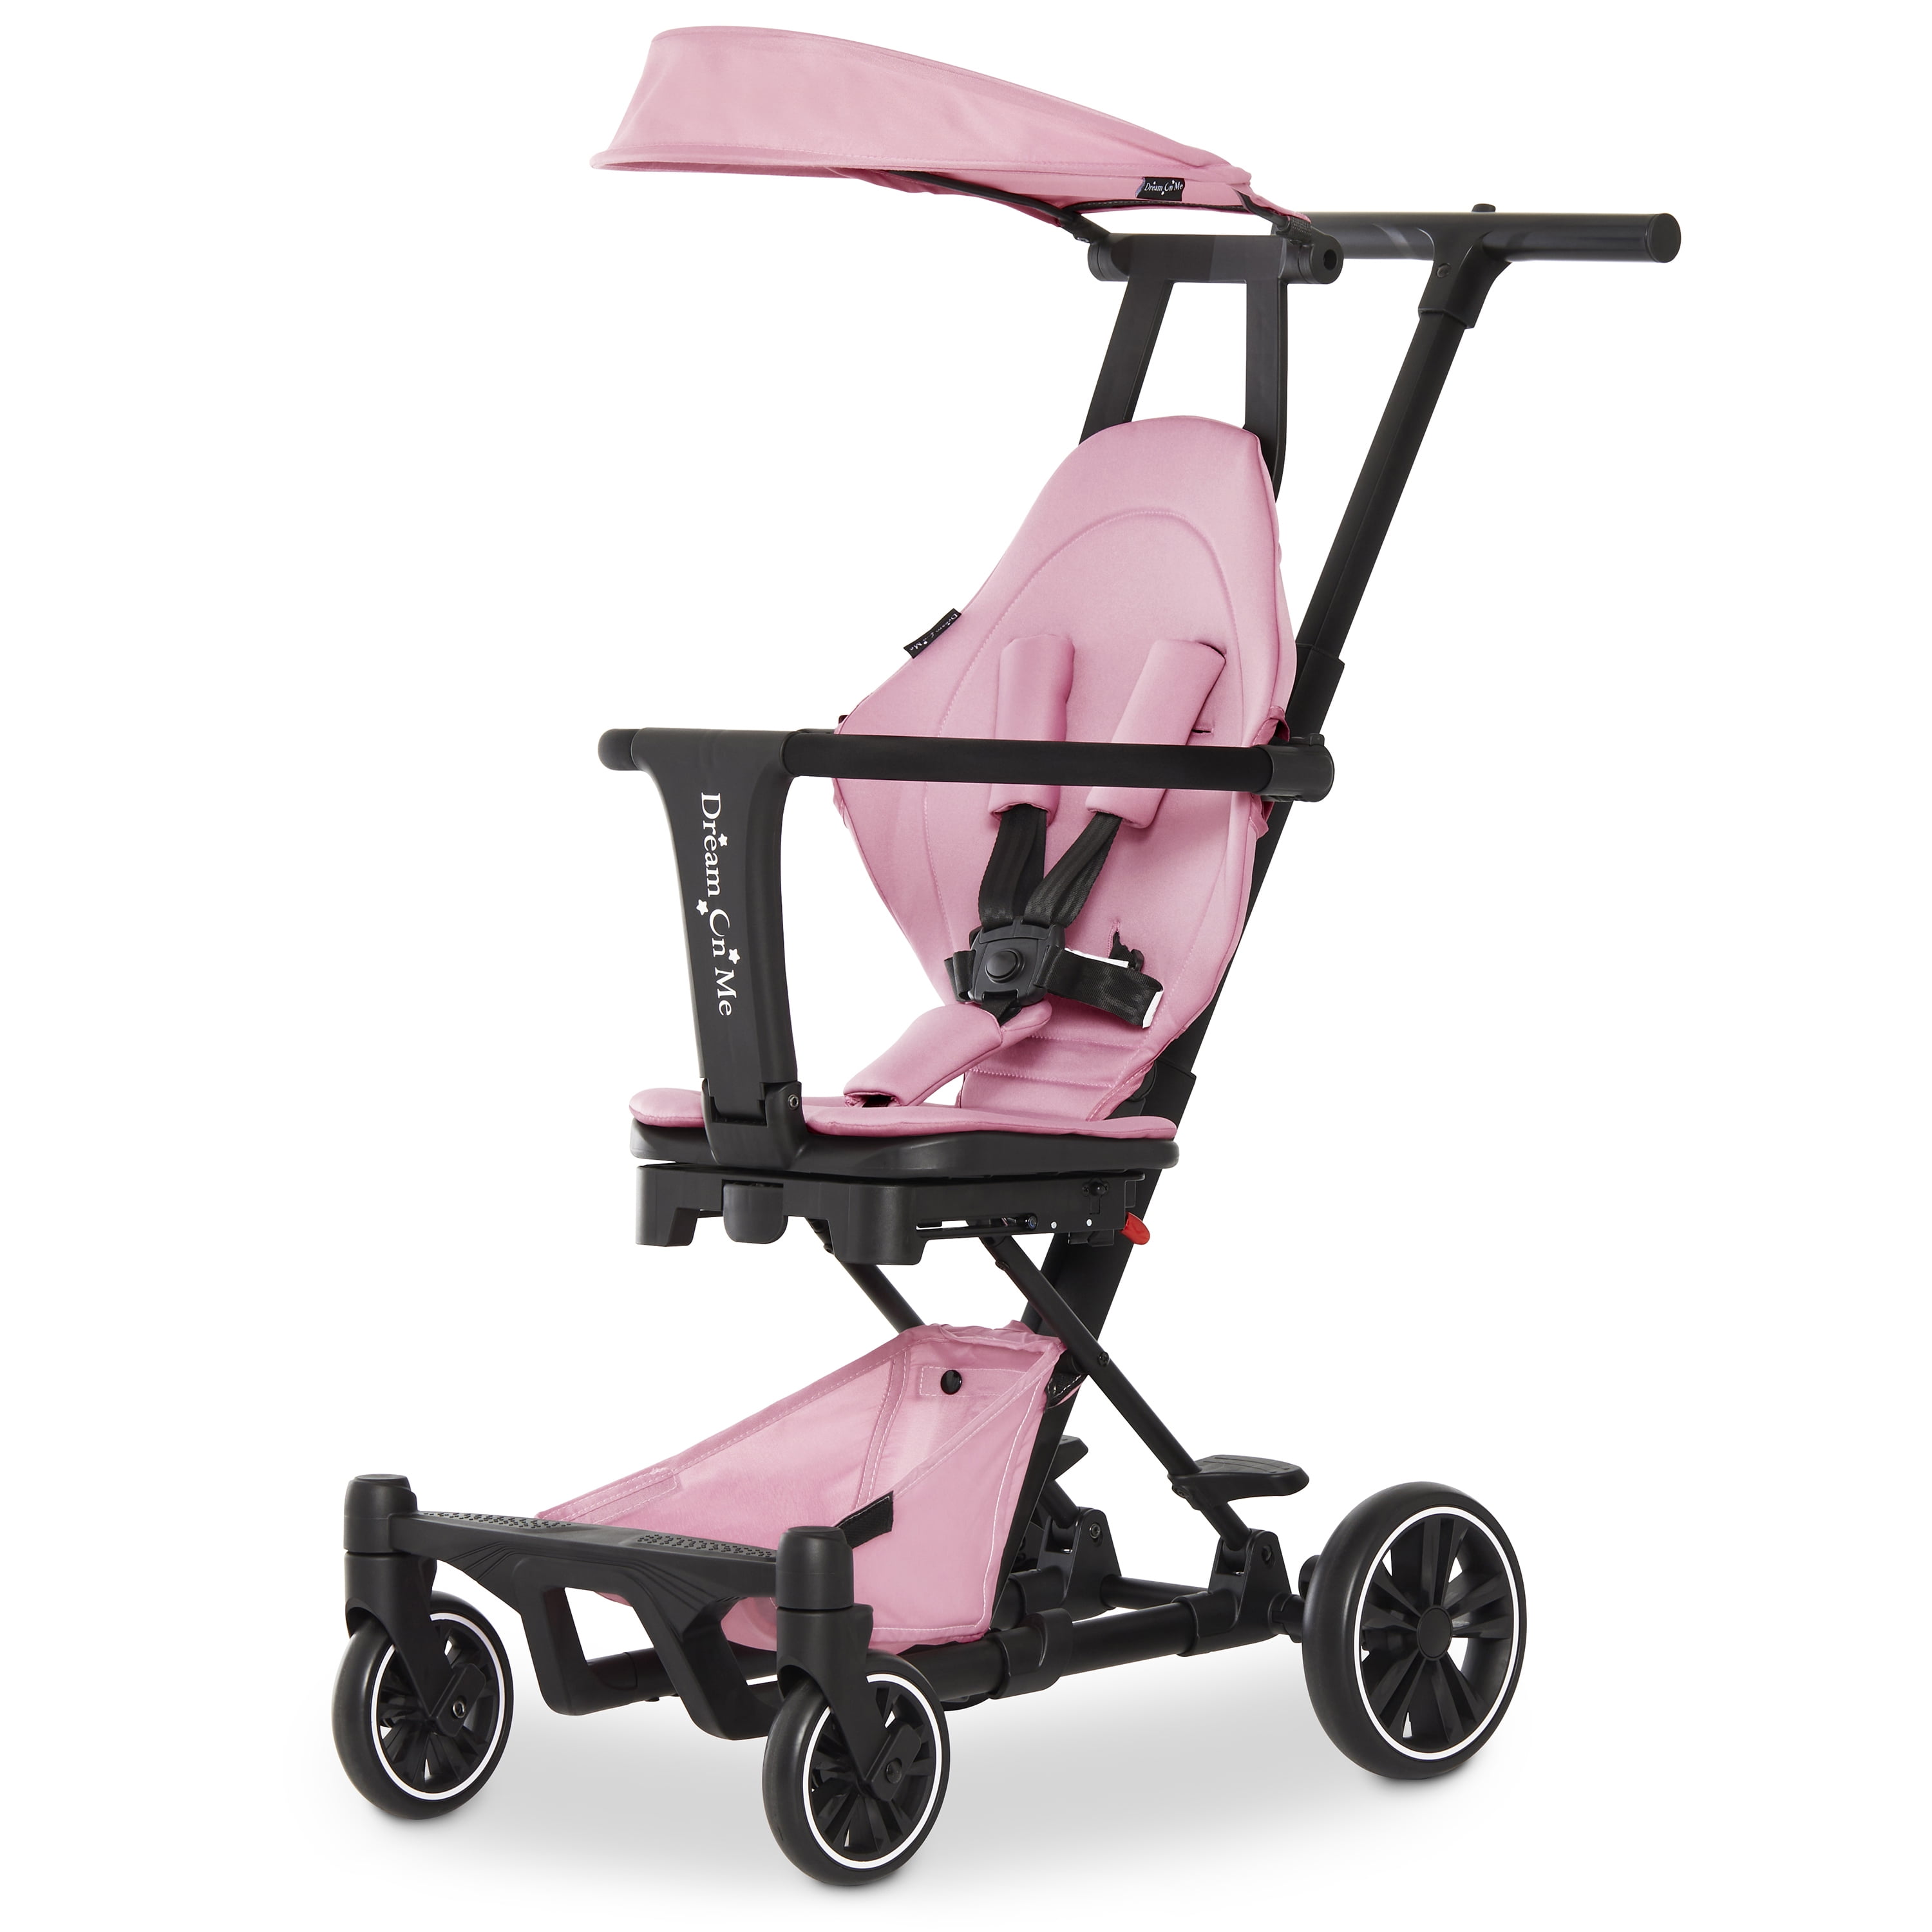 Smartrike Personalized STR5 Folding Baby Tricycle Pink Grey